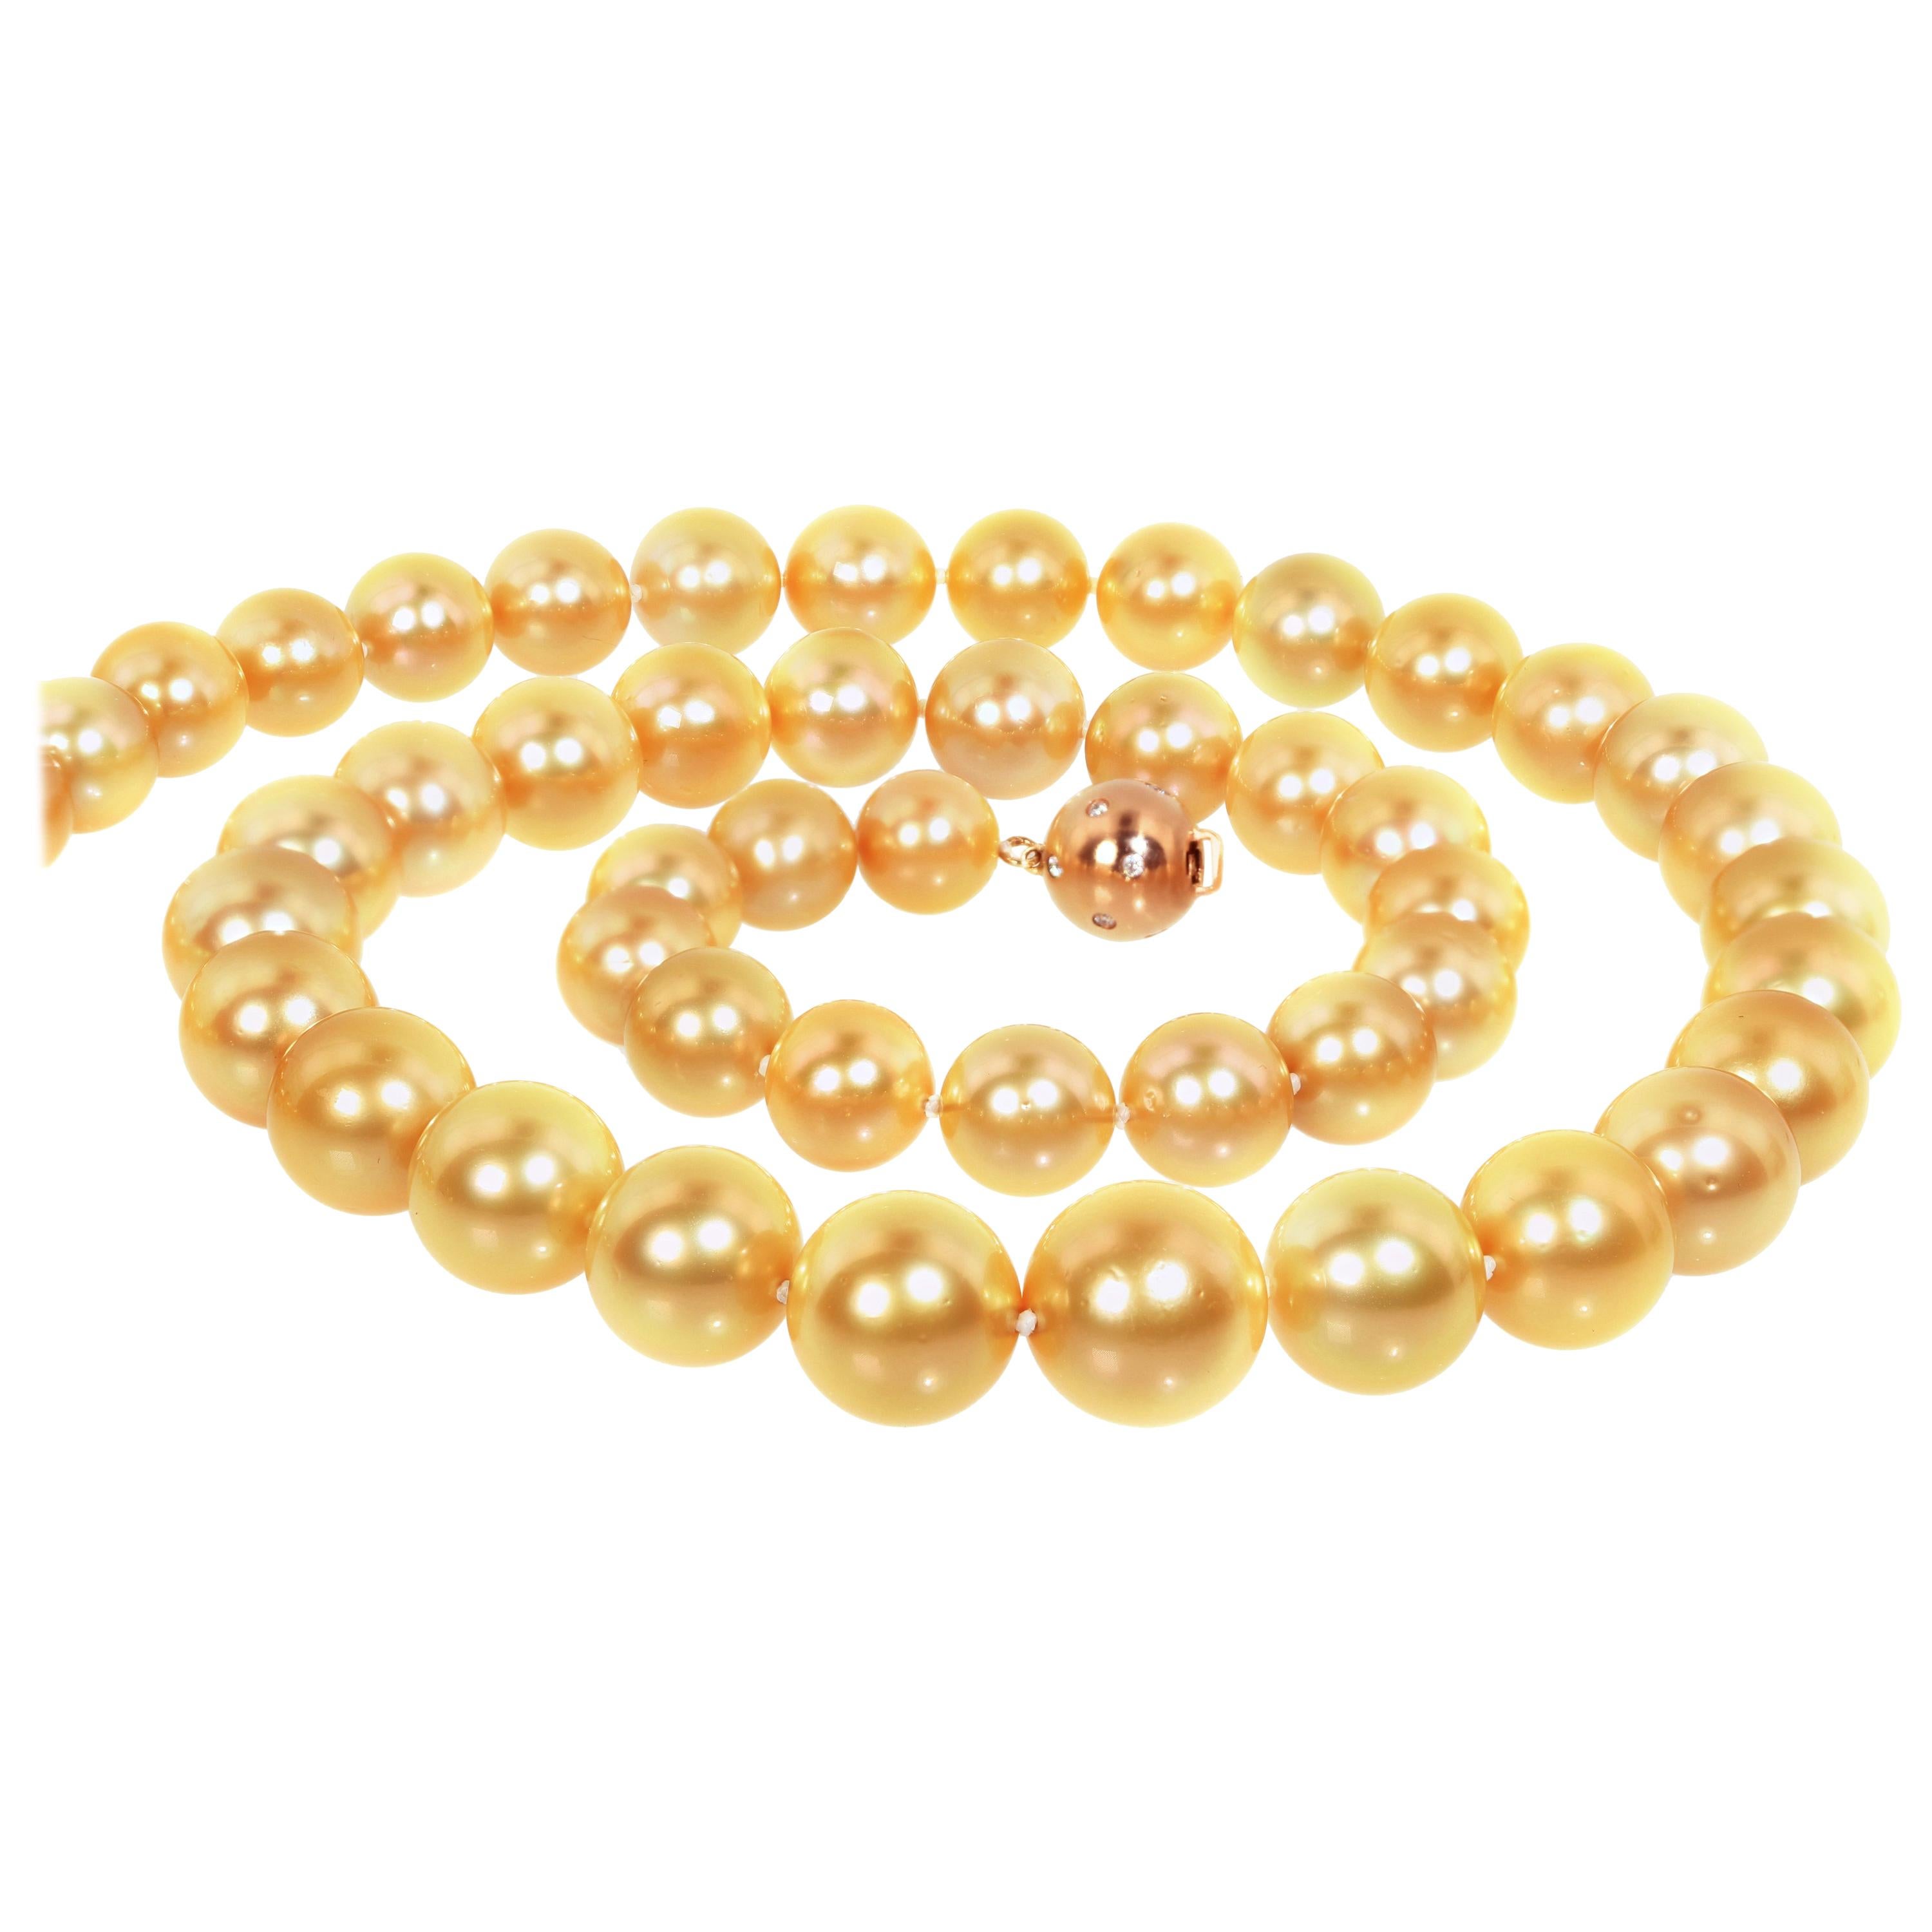 Golden South Sea Pearl Necklace with 18K Gold Clasp with Diamonds For Sale